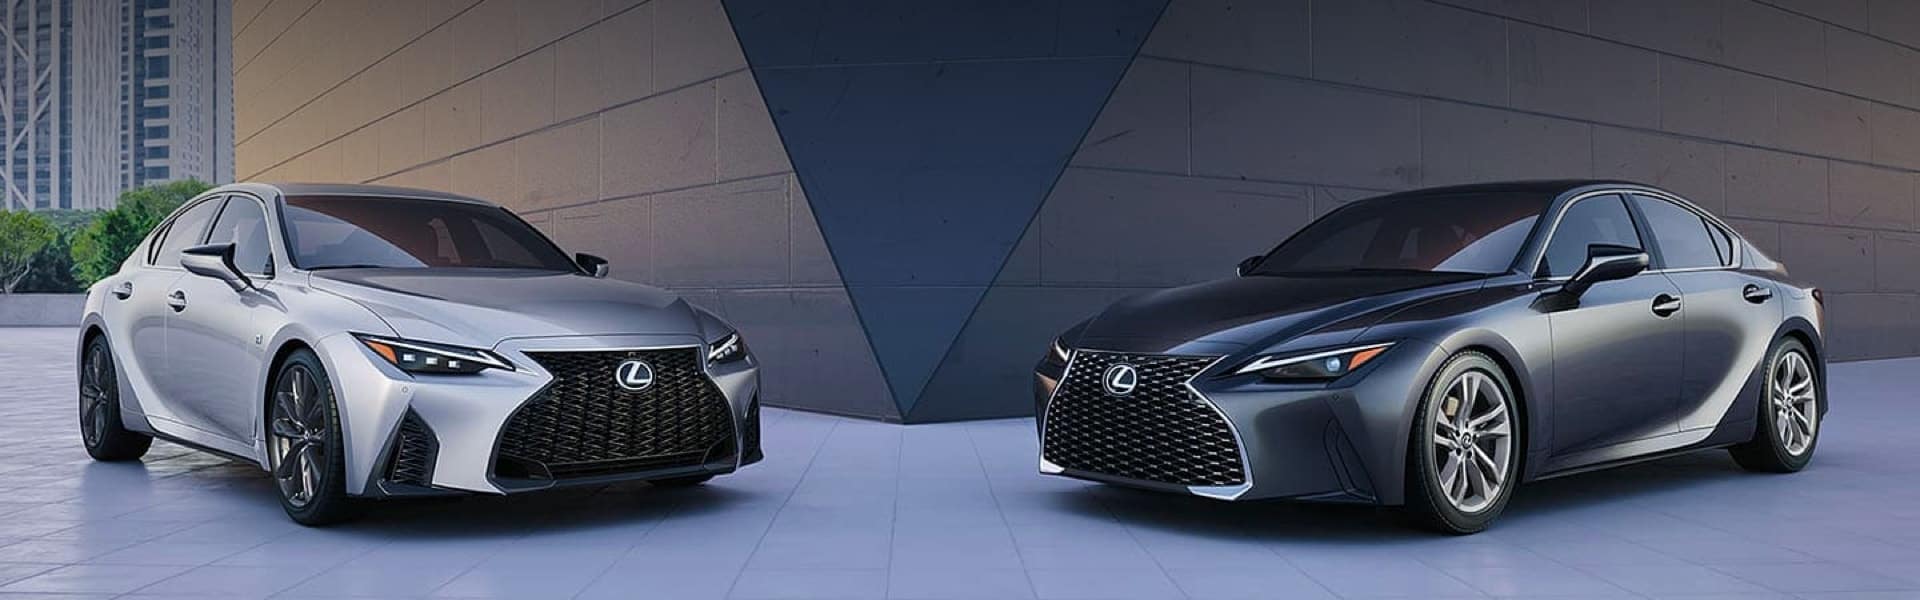 Two Lexus cars facing each other